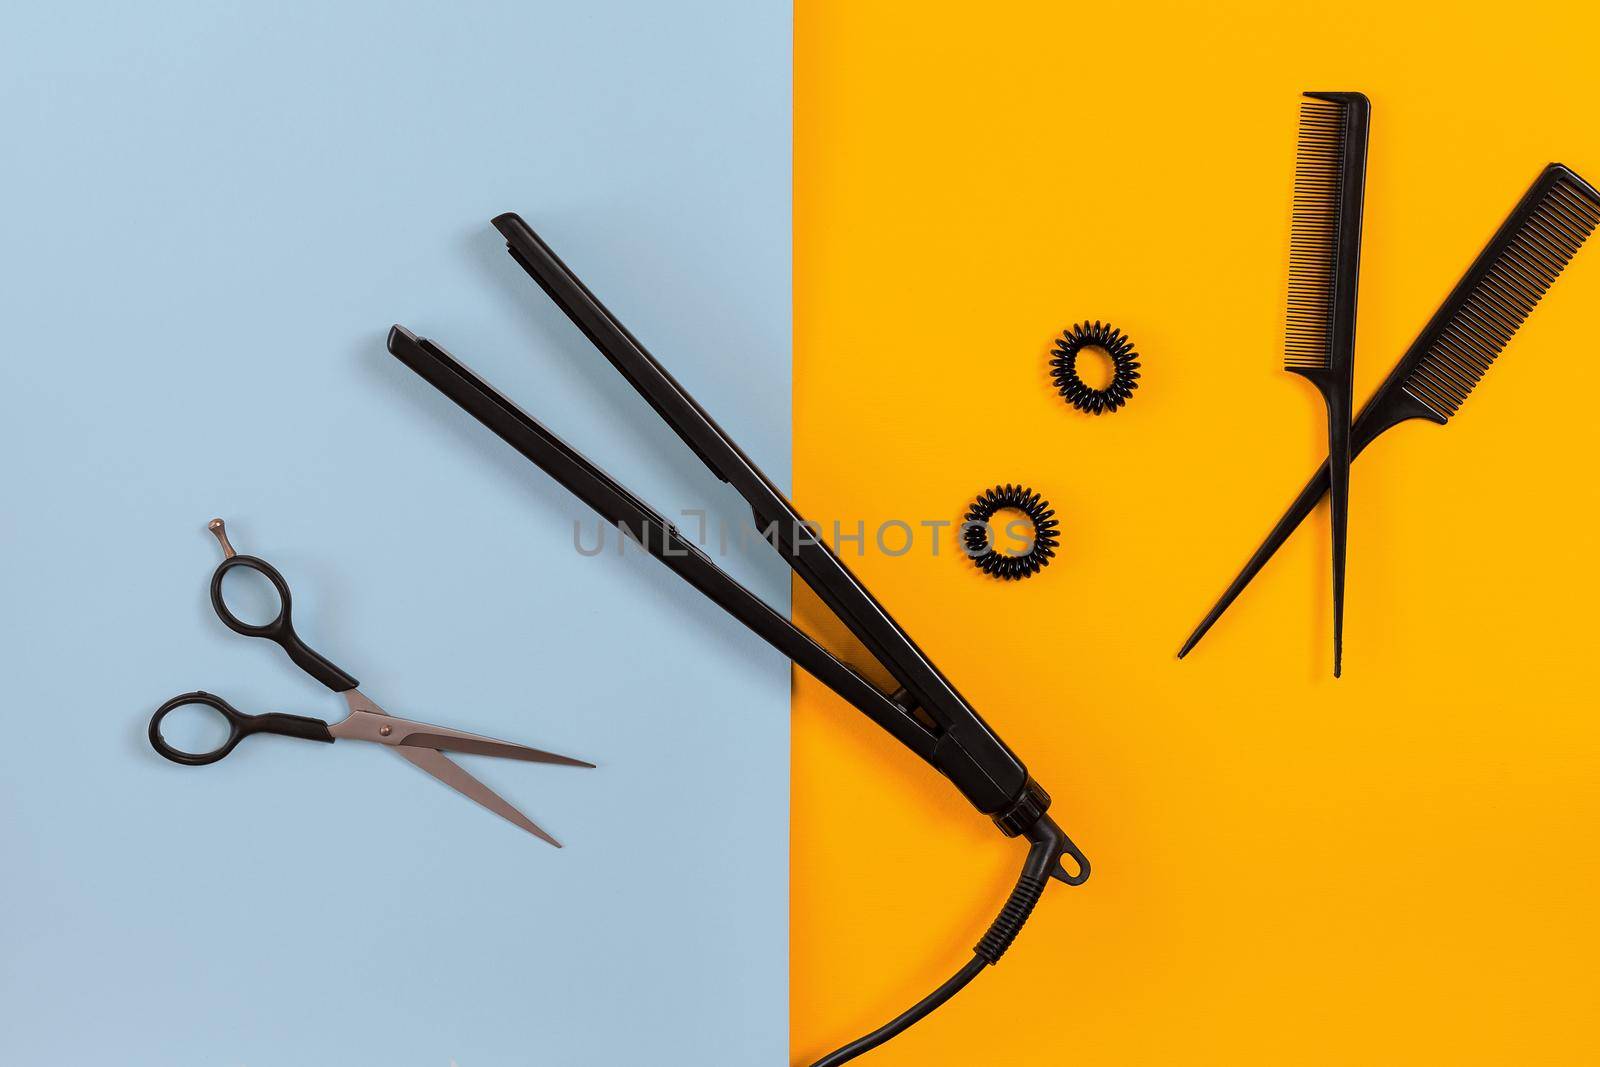 Hairdresser set with various accessories on orange and blue background. Top view. Copy space. Still life. Mock-up. Flat lay